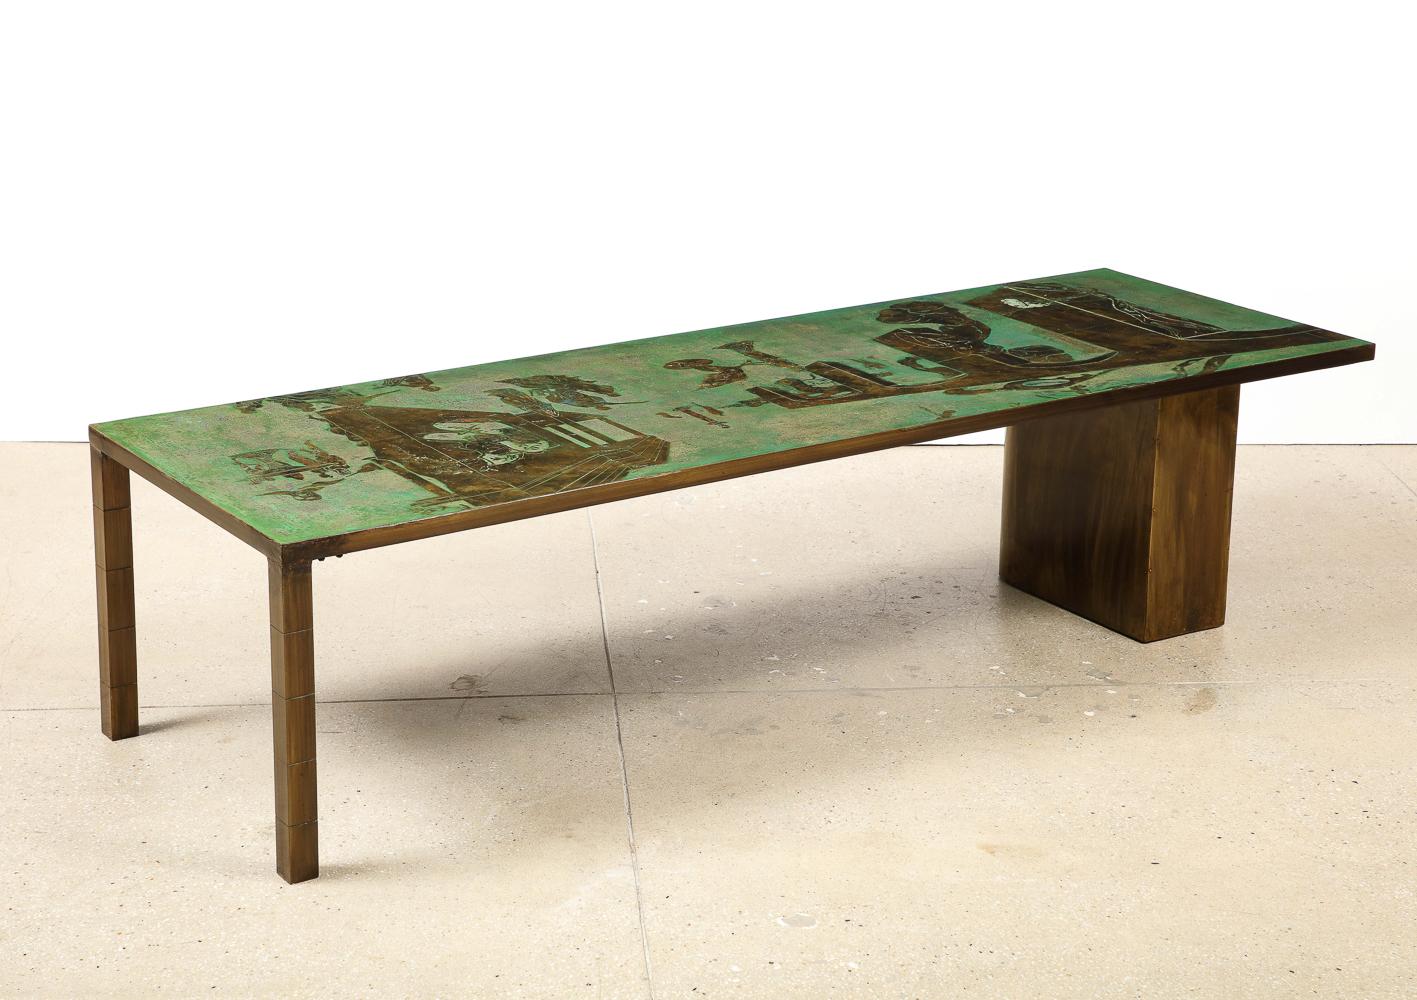 Patinated bronze, enameled pewter, wood. Large scale 3-legged cocktail table. Etched design in homage of Salvador Dali's 